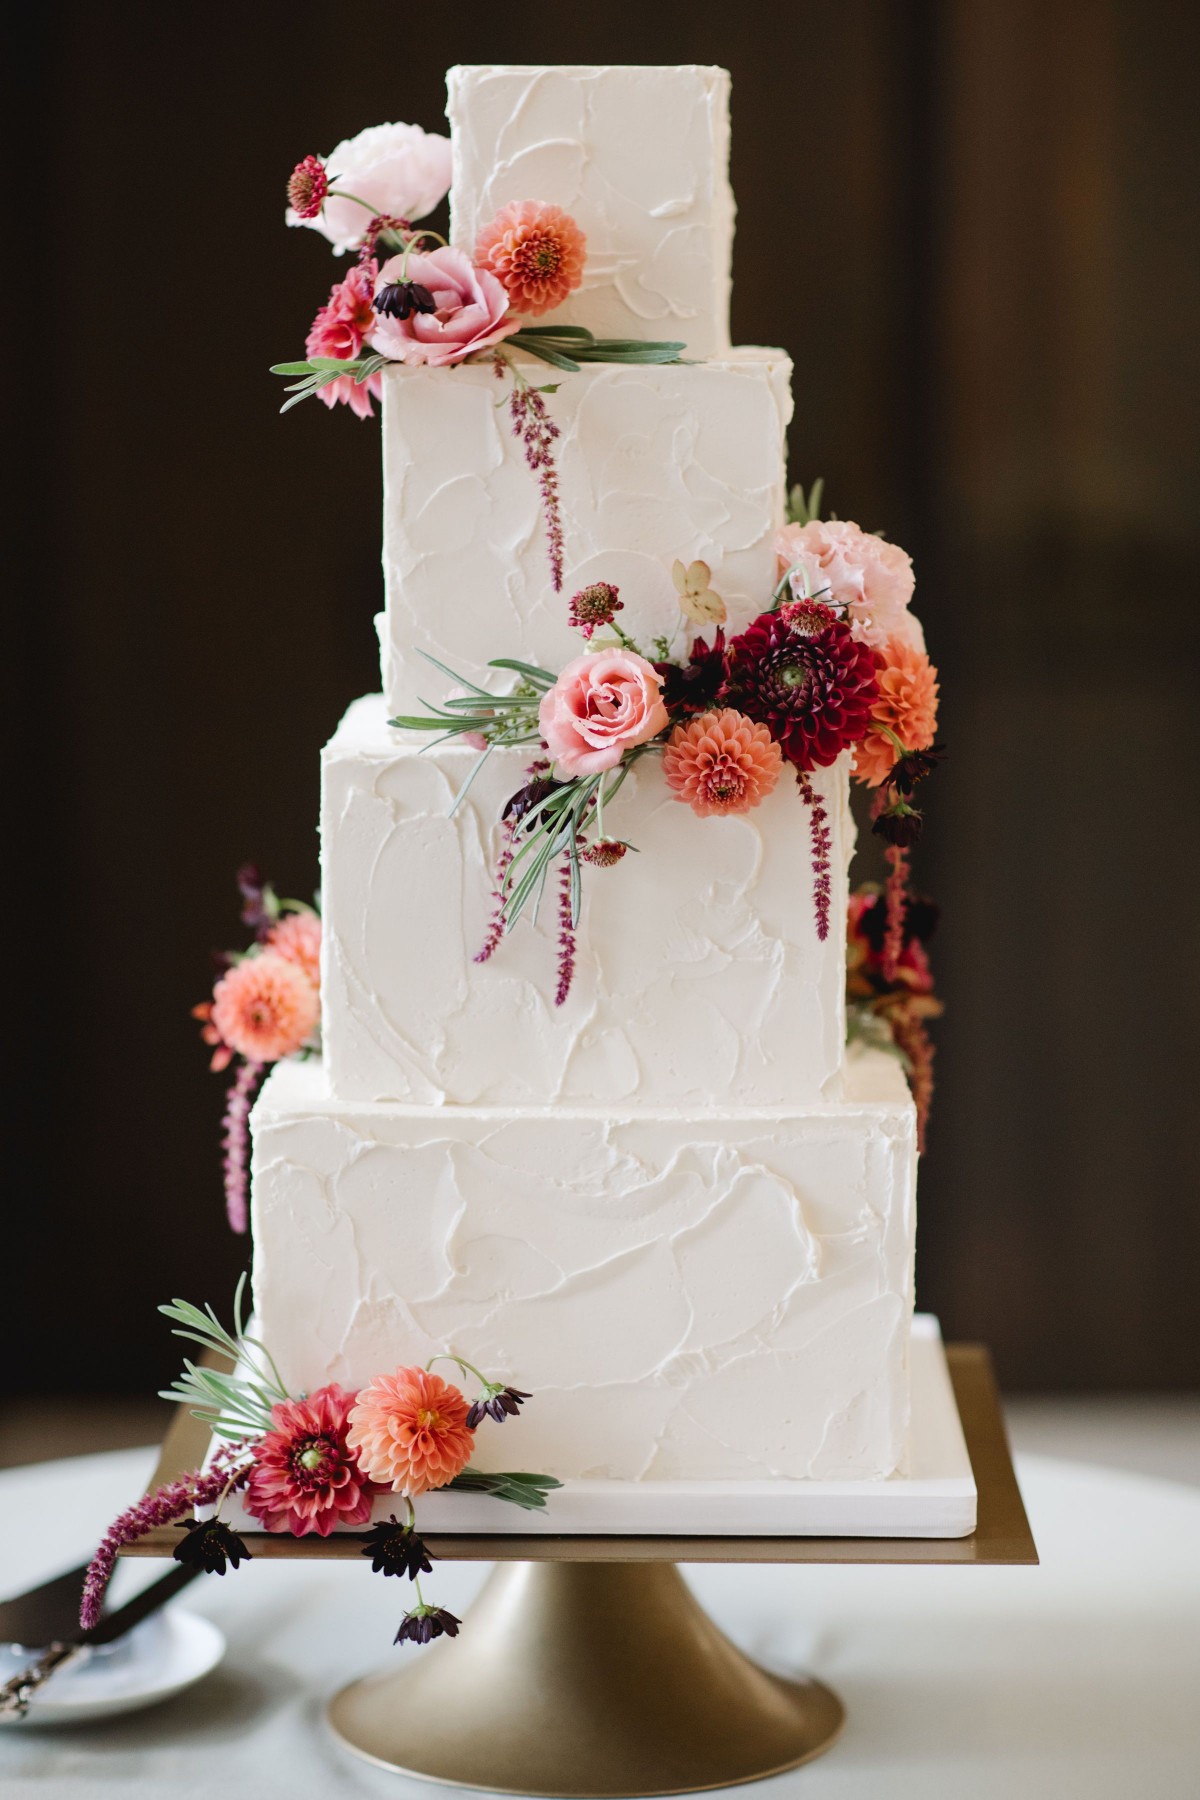 Fresh Flowers on a 4 Tier Square Wedding Cake